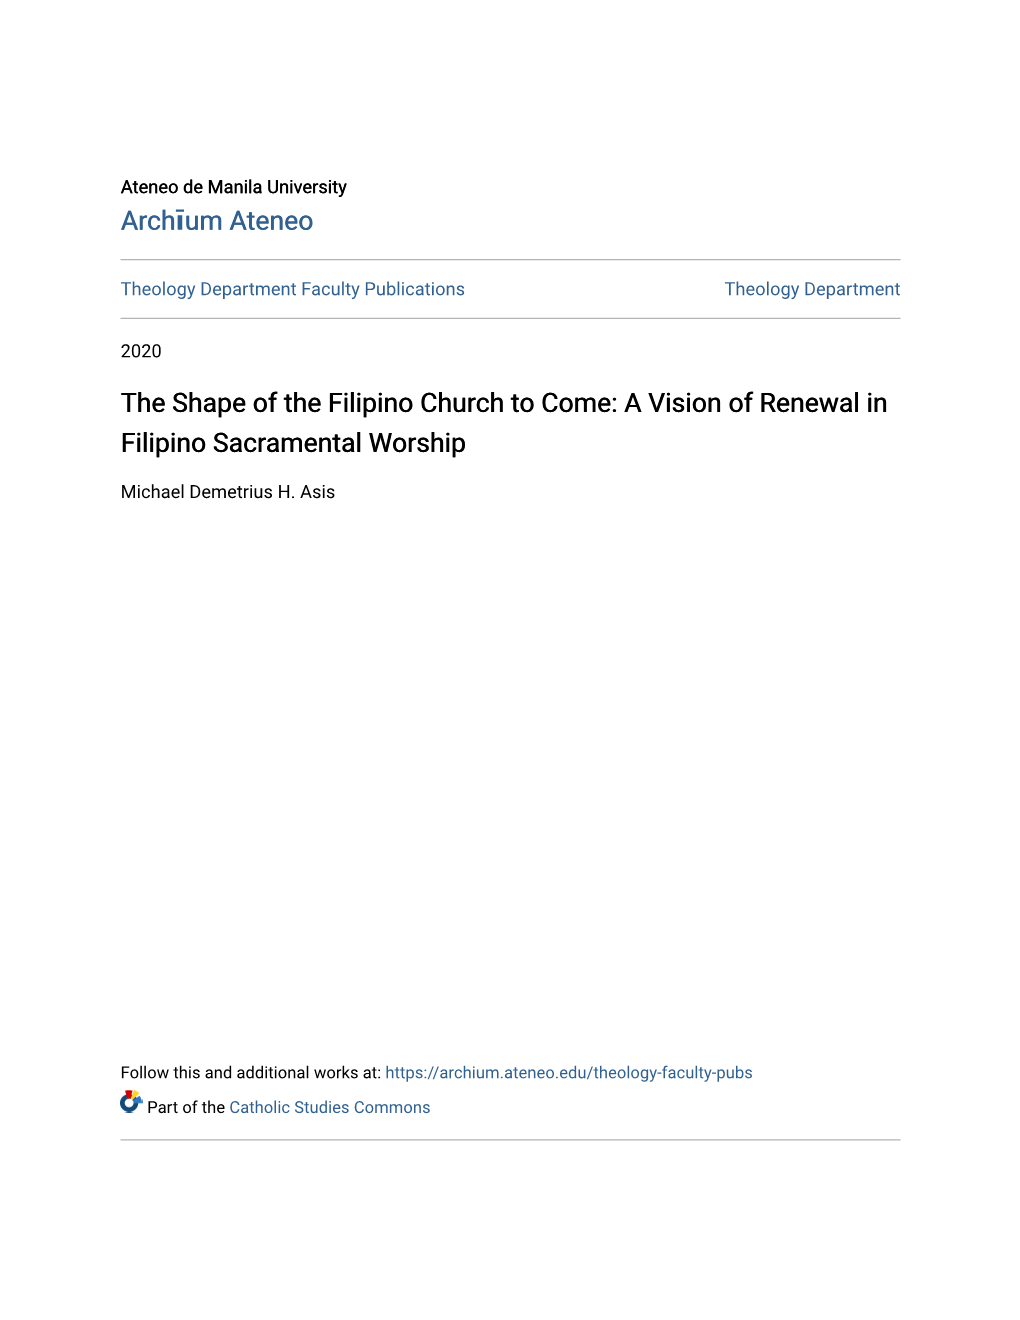 The Shape of the Filipino Church to Come: a Vision of Renewal in Filipino Sacramental Worship